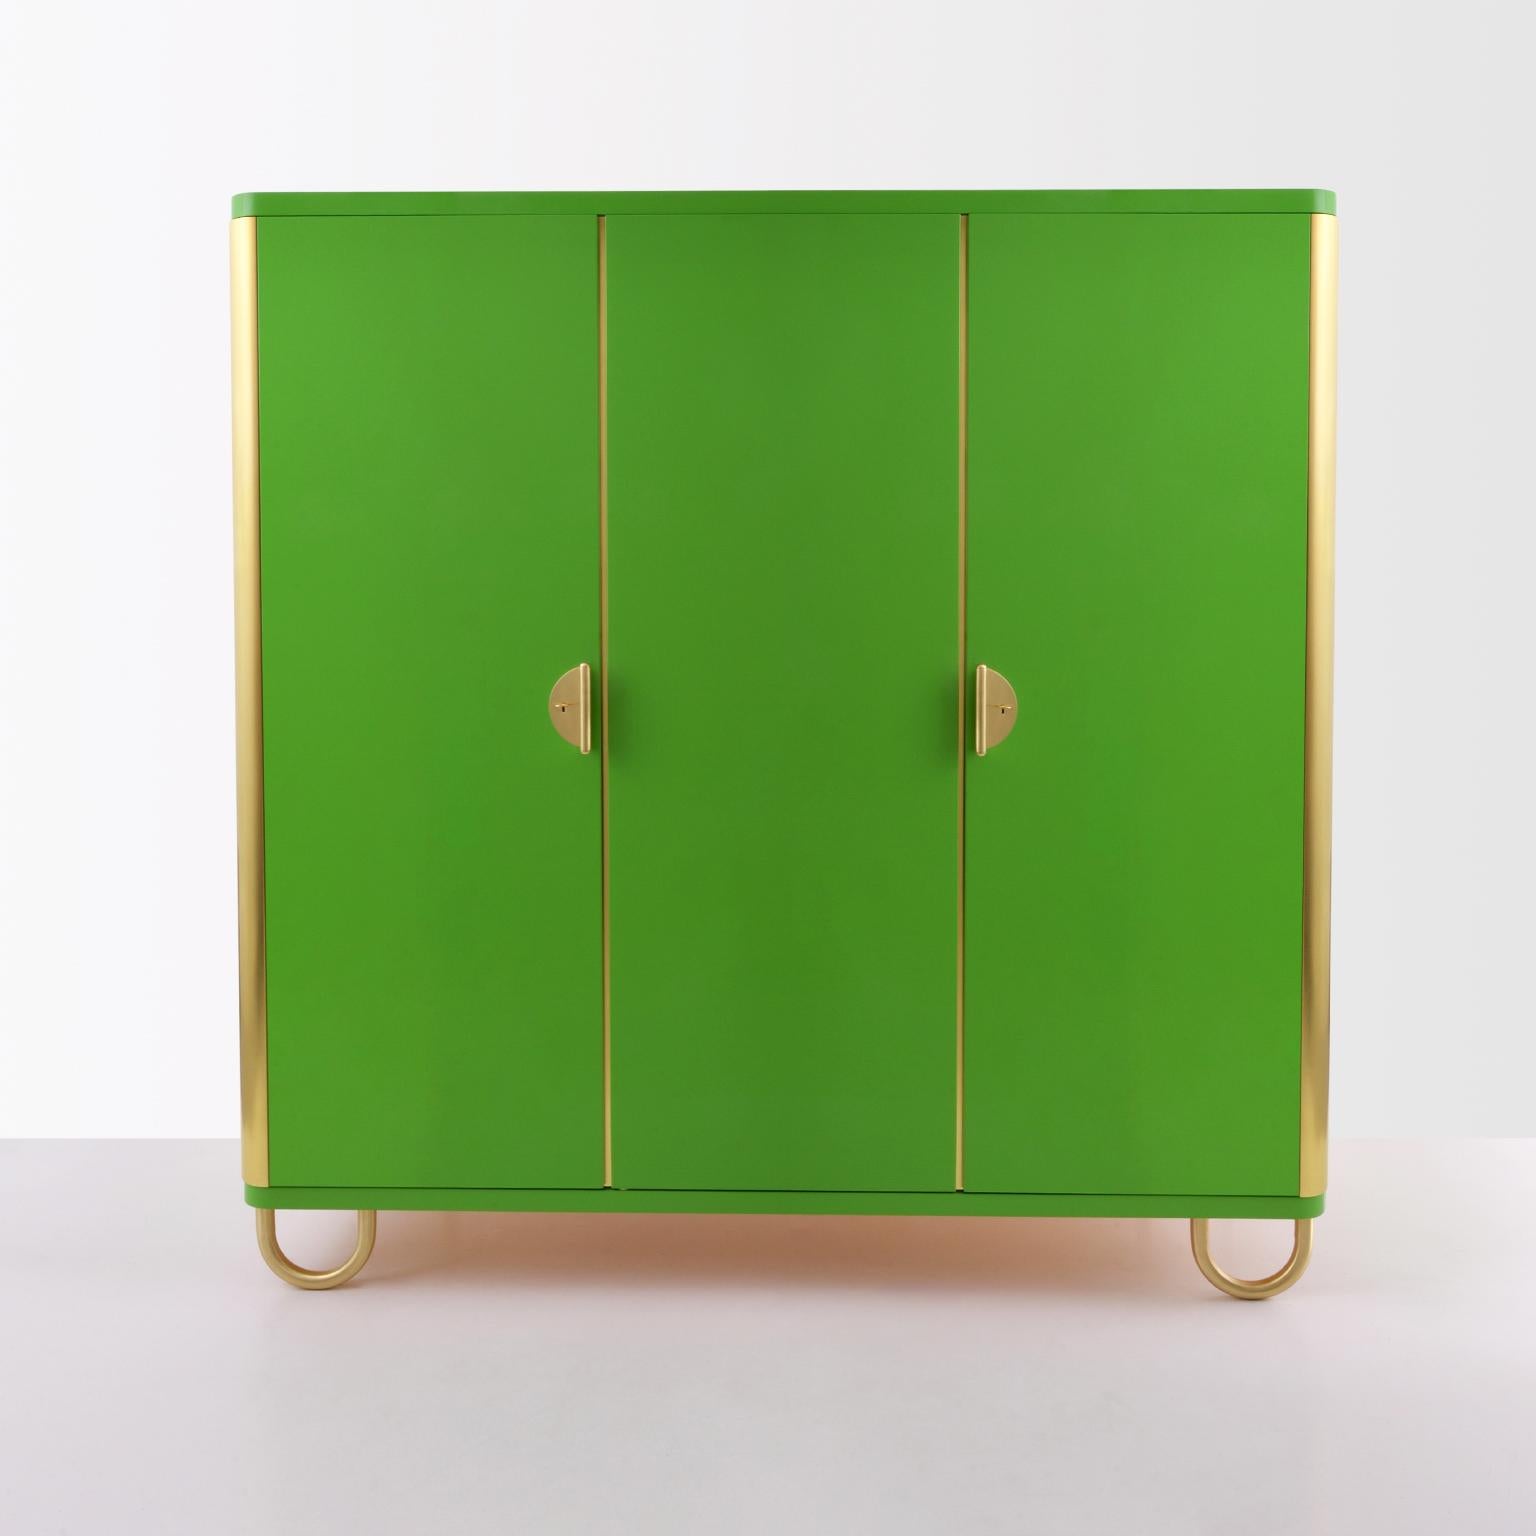 Customized Modernist Three-Door Wardrobe, Brass Hardware, Glossy Lacquered Wood In New Condition For Sale In Berlin, DE